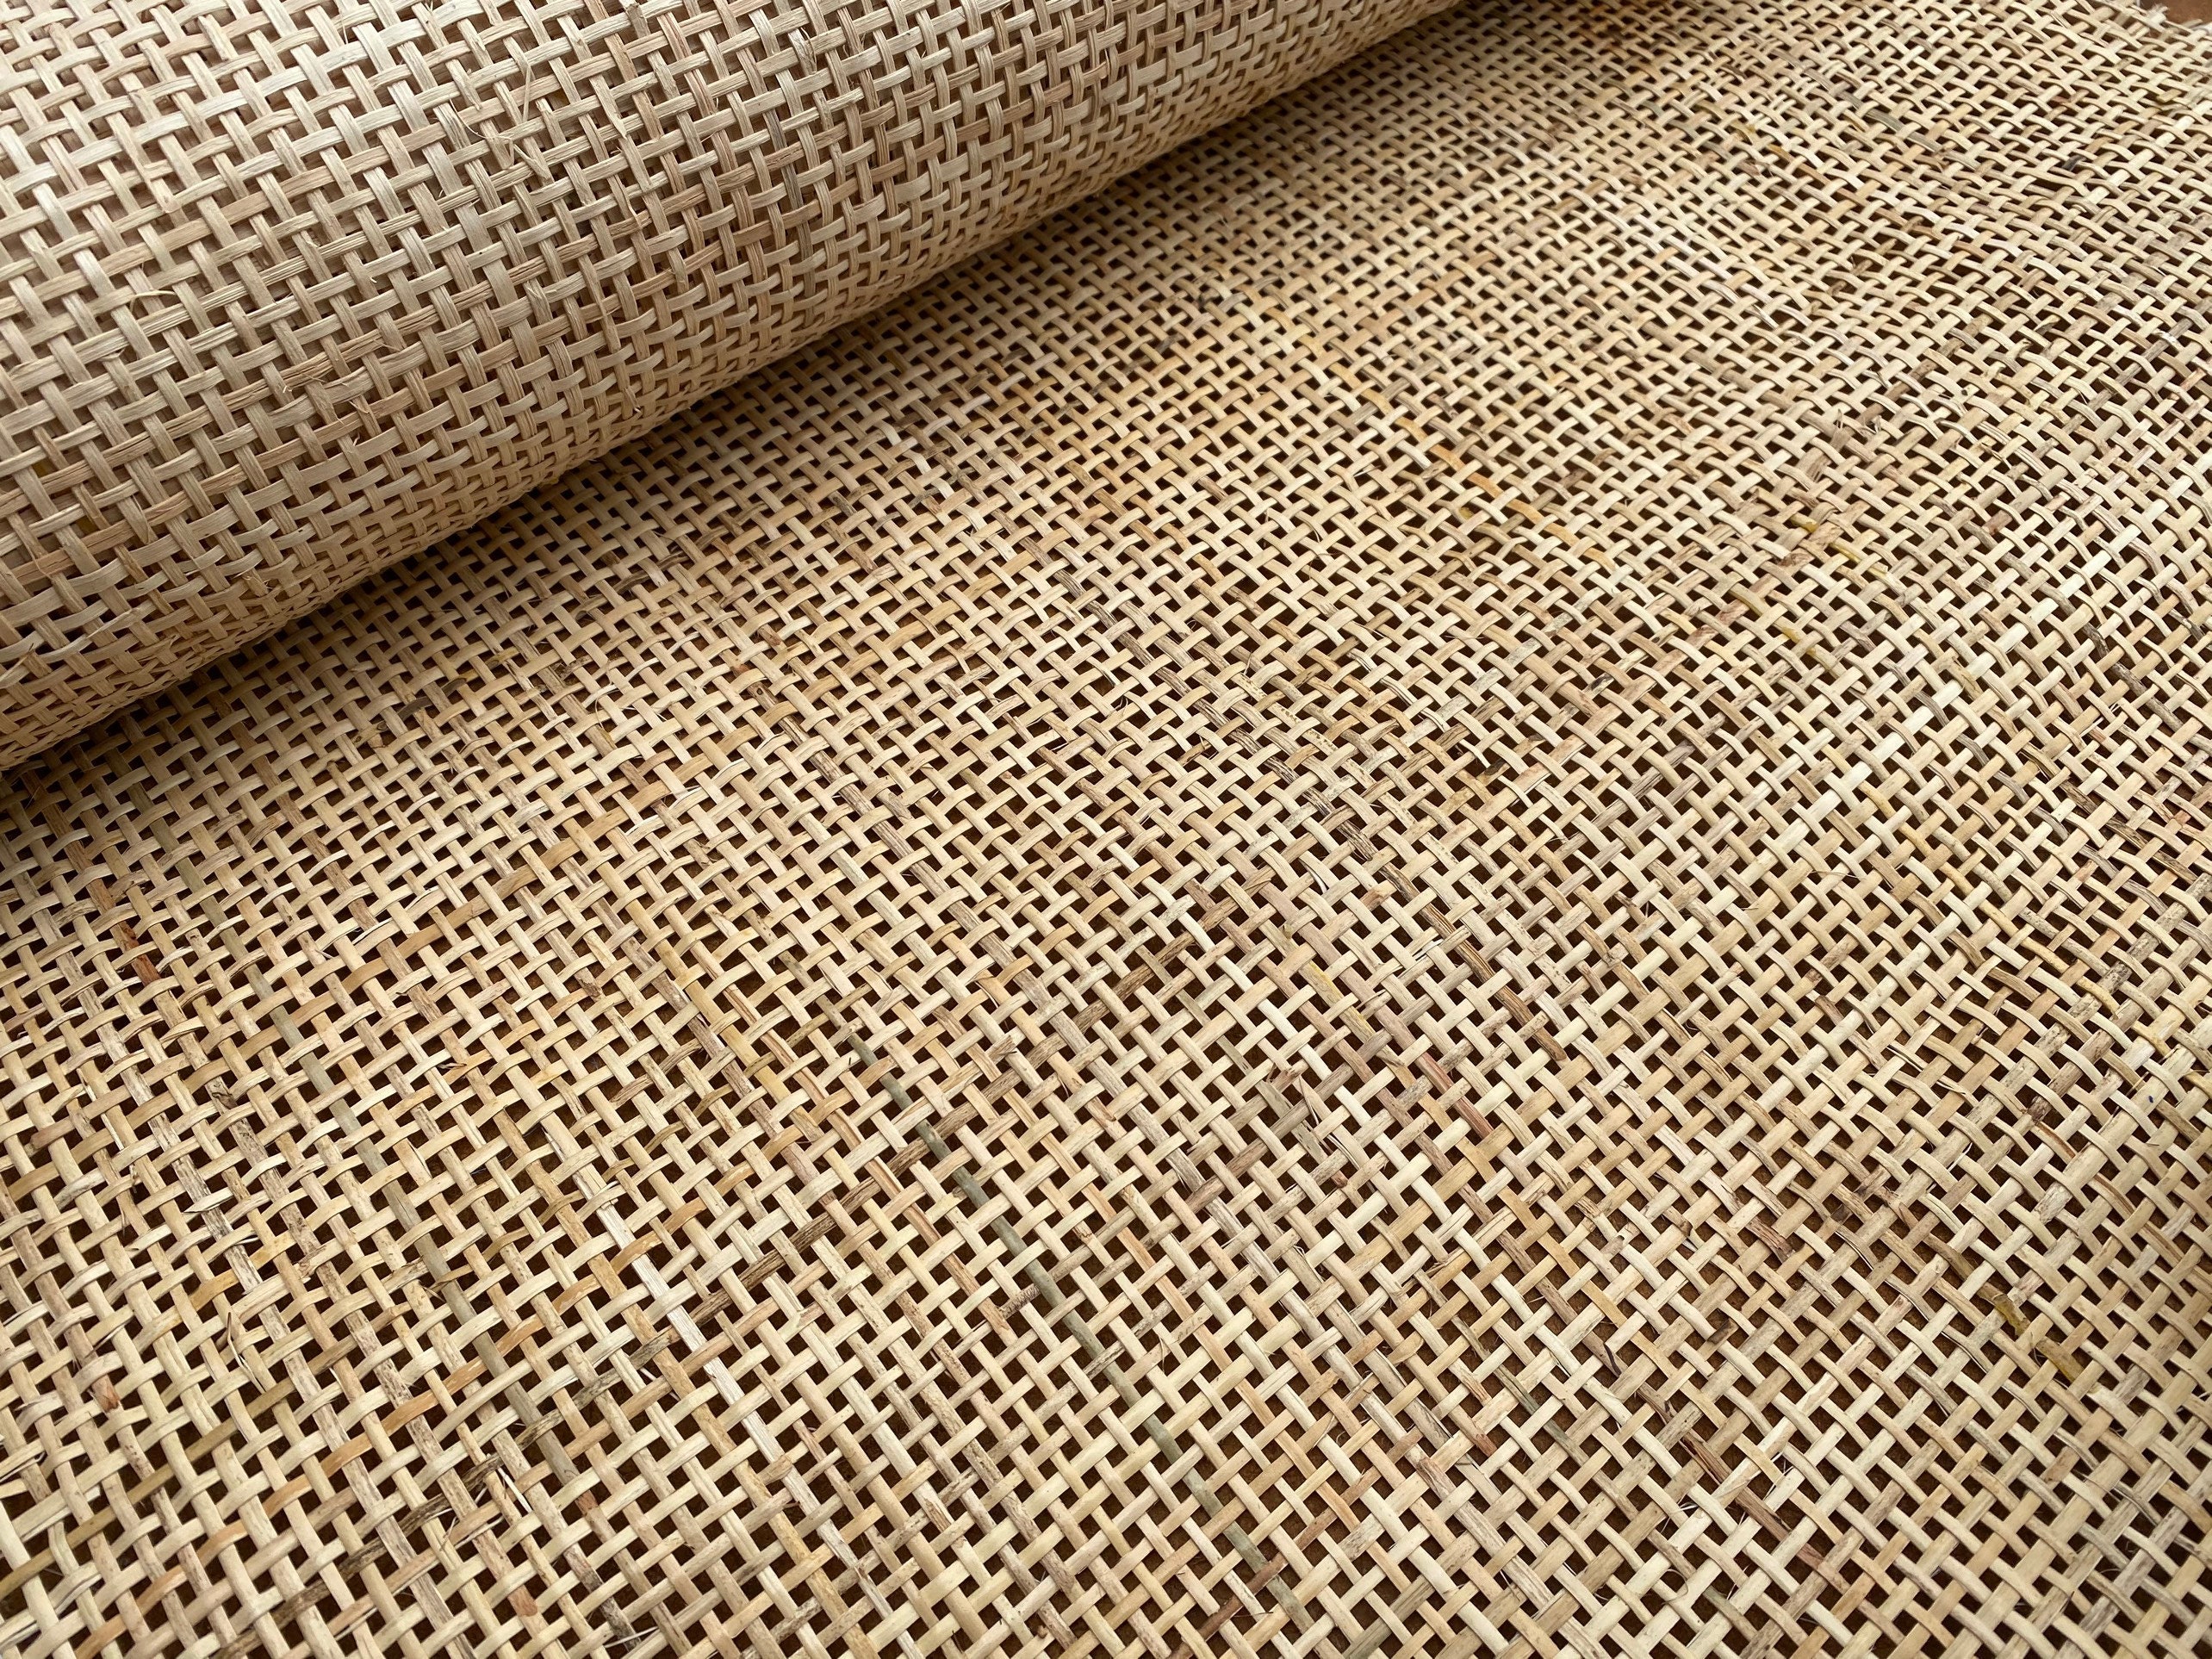 Rattan Cane Webbing Roll 2 Rolls ￼26 X 16 Inches And 28 X 16 Inches